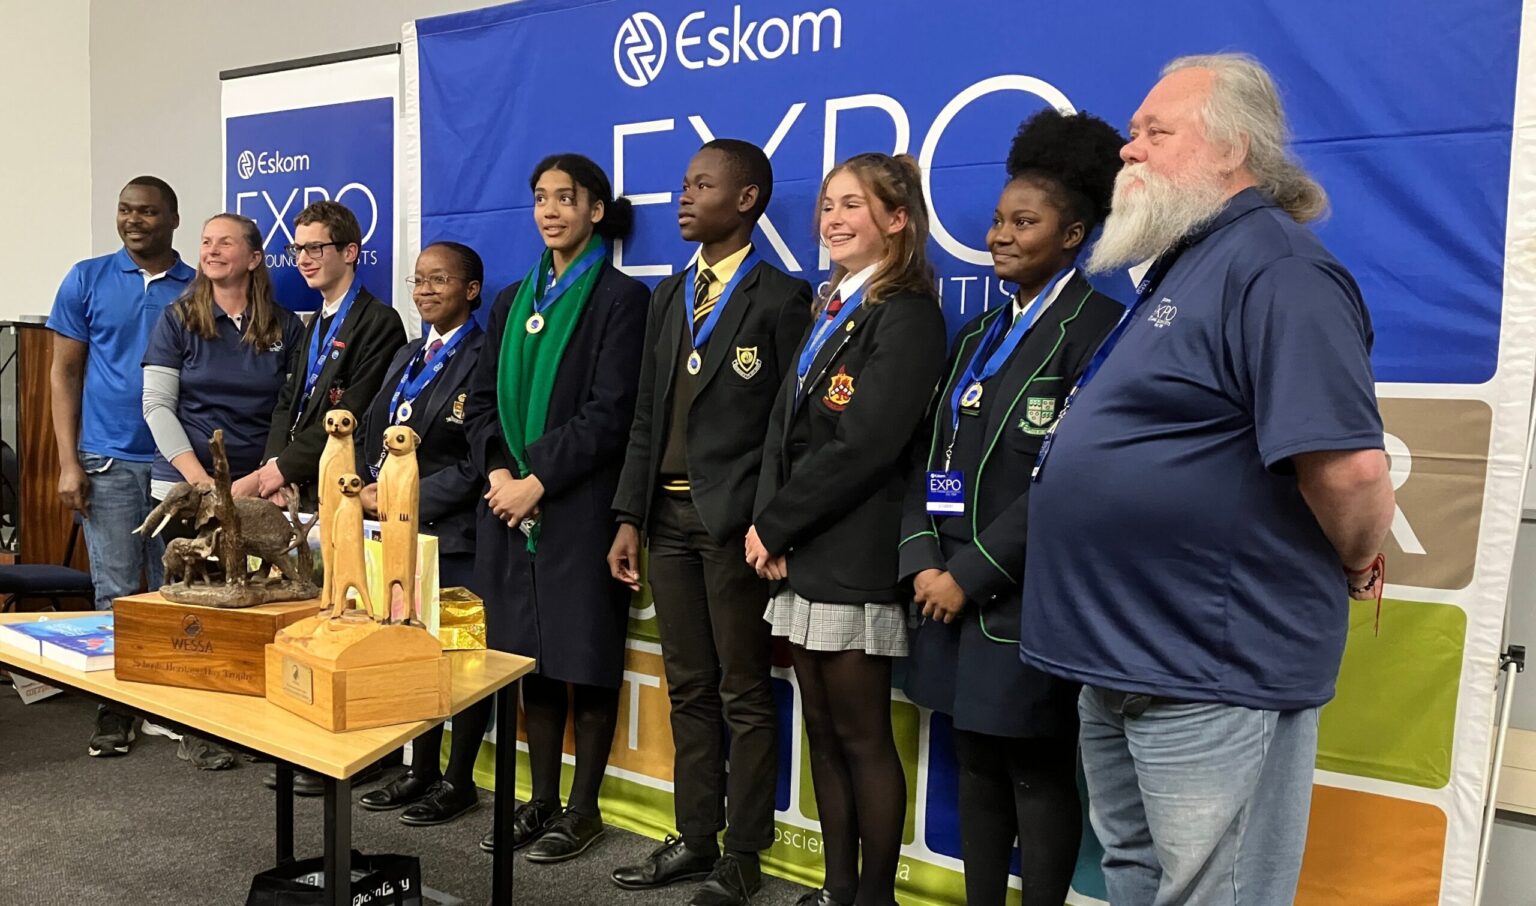 (From left) Eskom Expo provincial coordinator, Fredy Mashate; judge convenor, Nadia Czeredrecki-Schmidt and gold medal winners, Conré Henning, Dinisa Buhle, Mairi van Schoor, Alutha Botha, Savanna Renaud, Rutendo Chakona and chief judge Leo Goosen at the prize-giving. Photo: Steven Lang